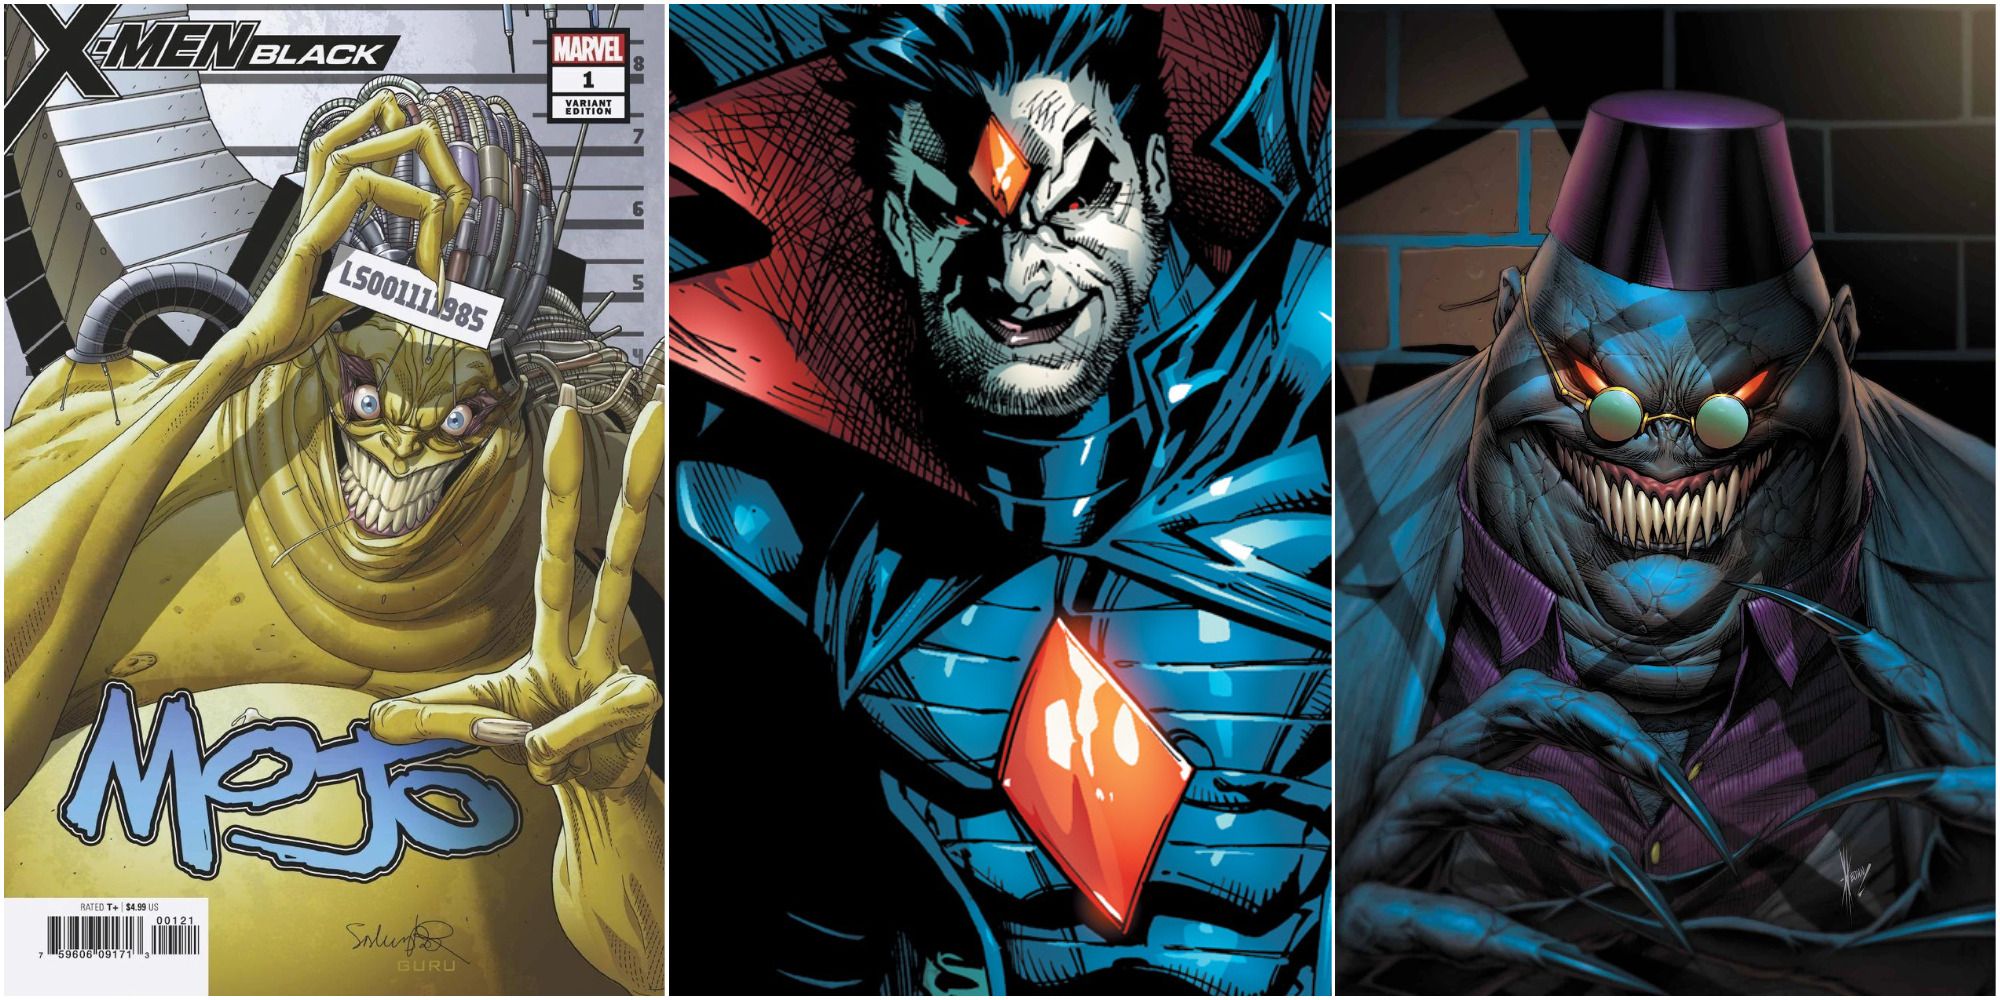 Mojo, Mister Sinister, and Shadow King